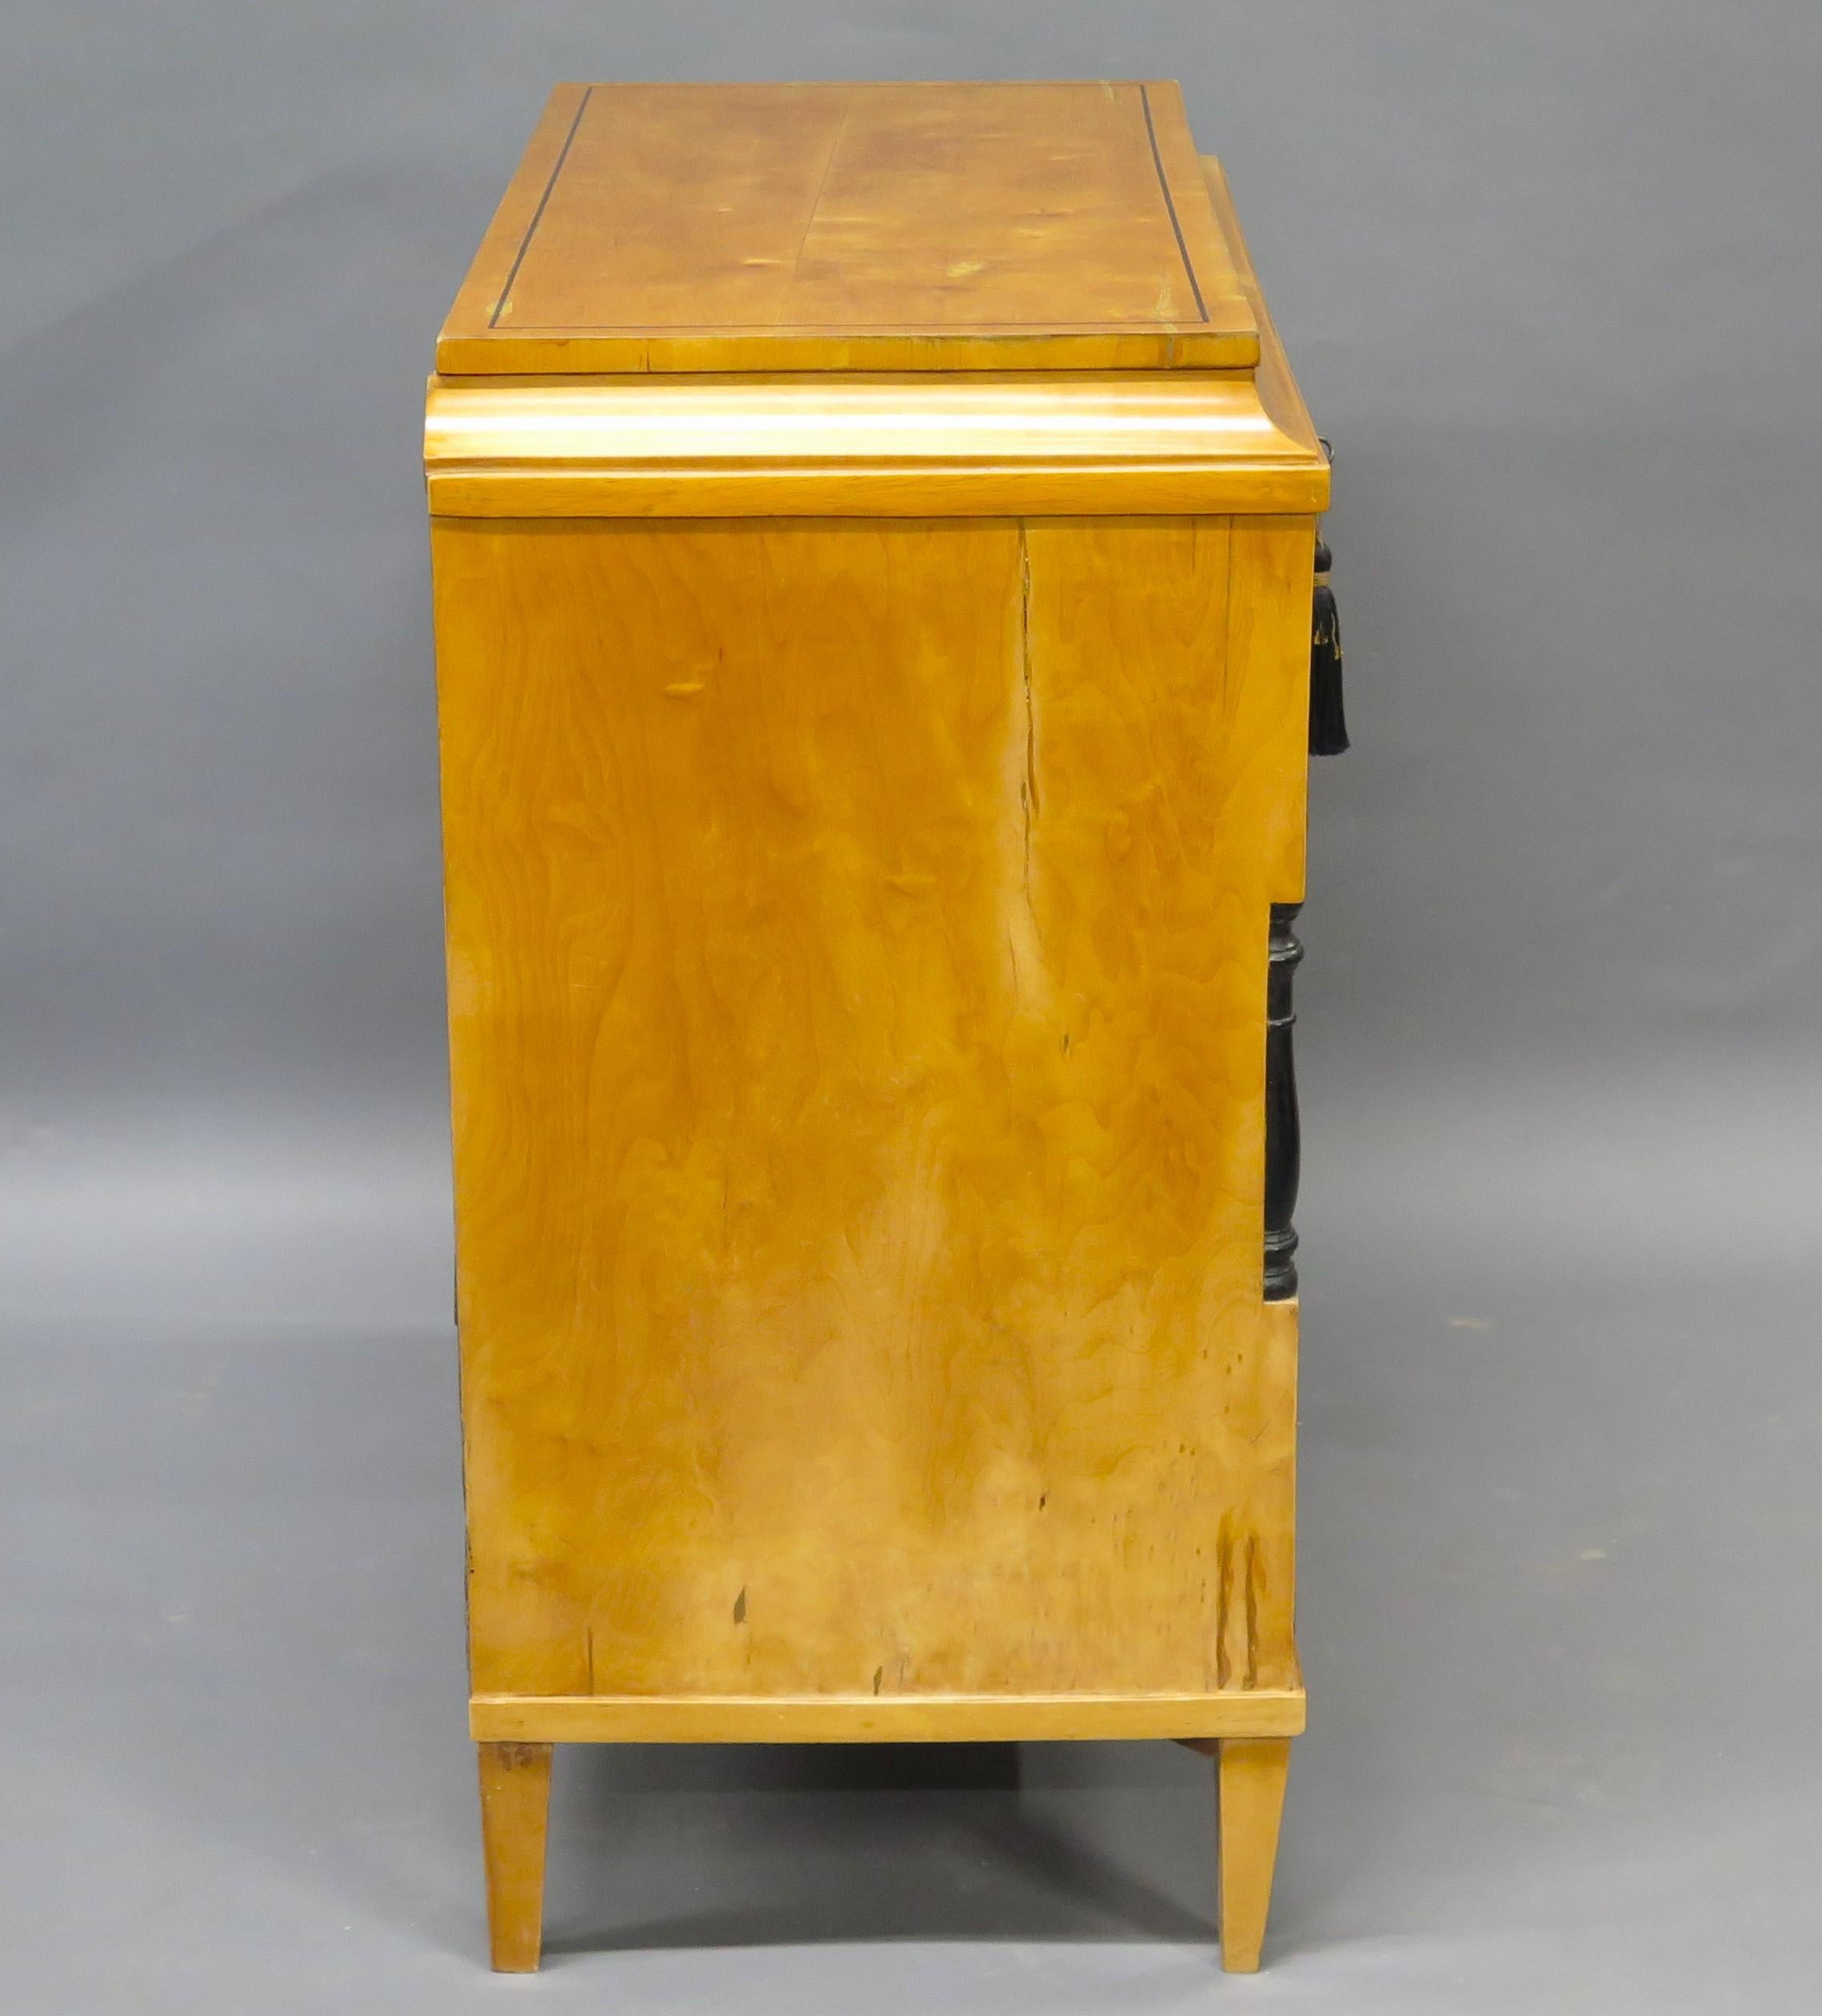 German A Biedermeier Inlaid Commode First Half 19th C. For Sale